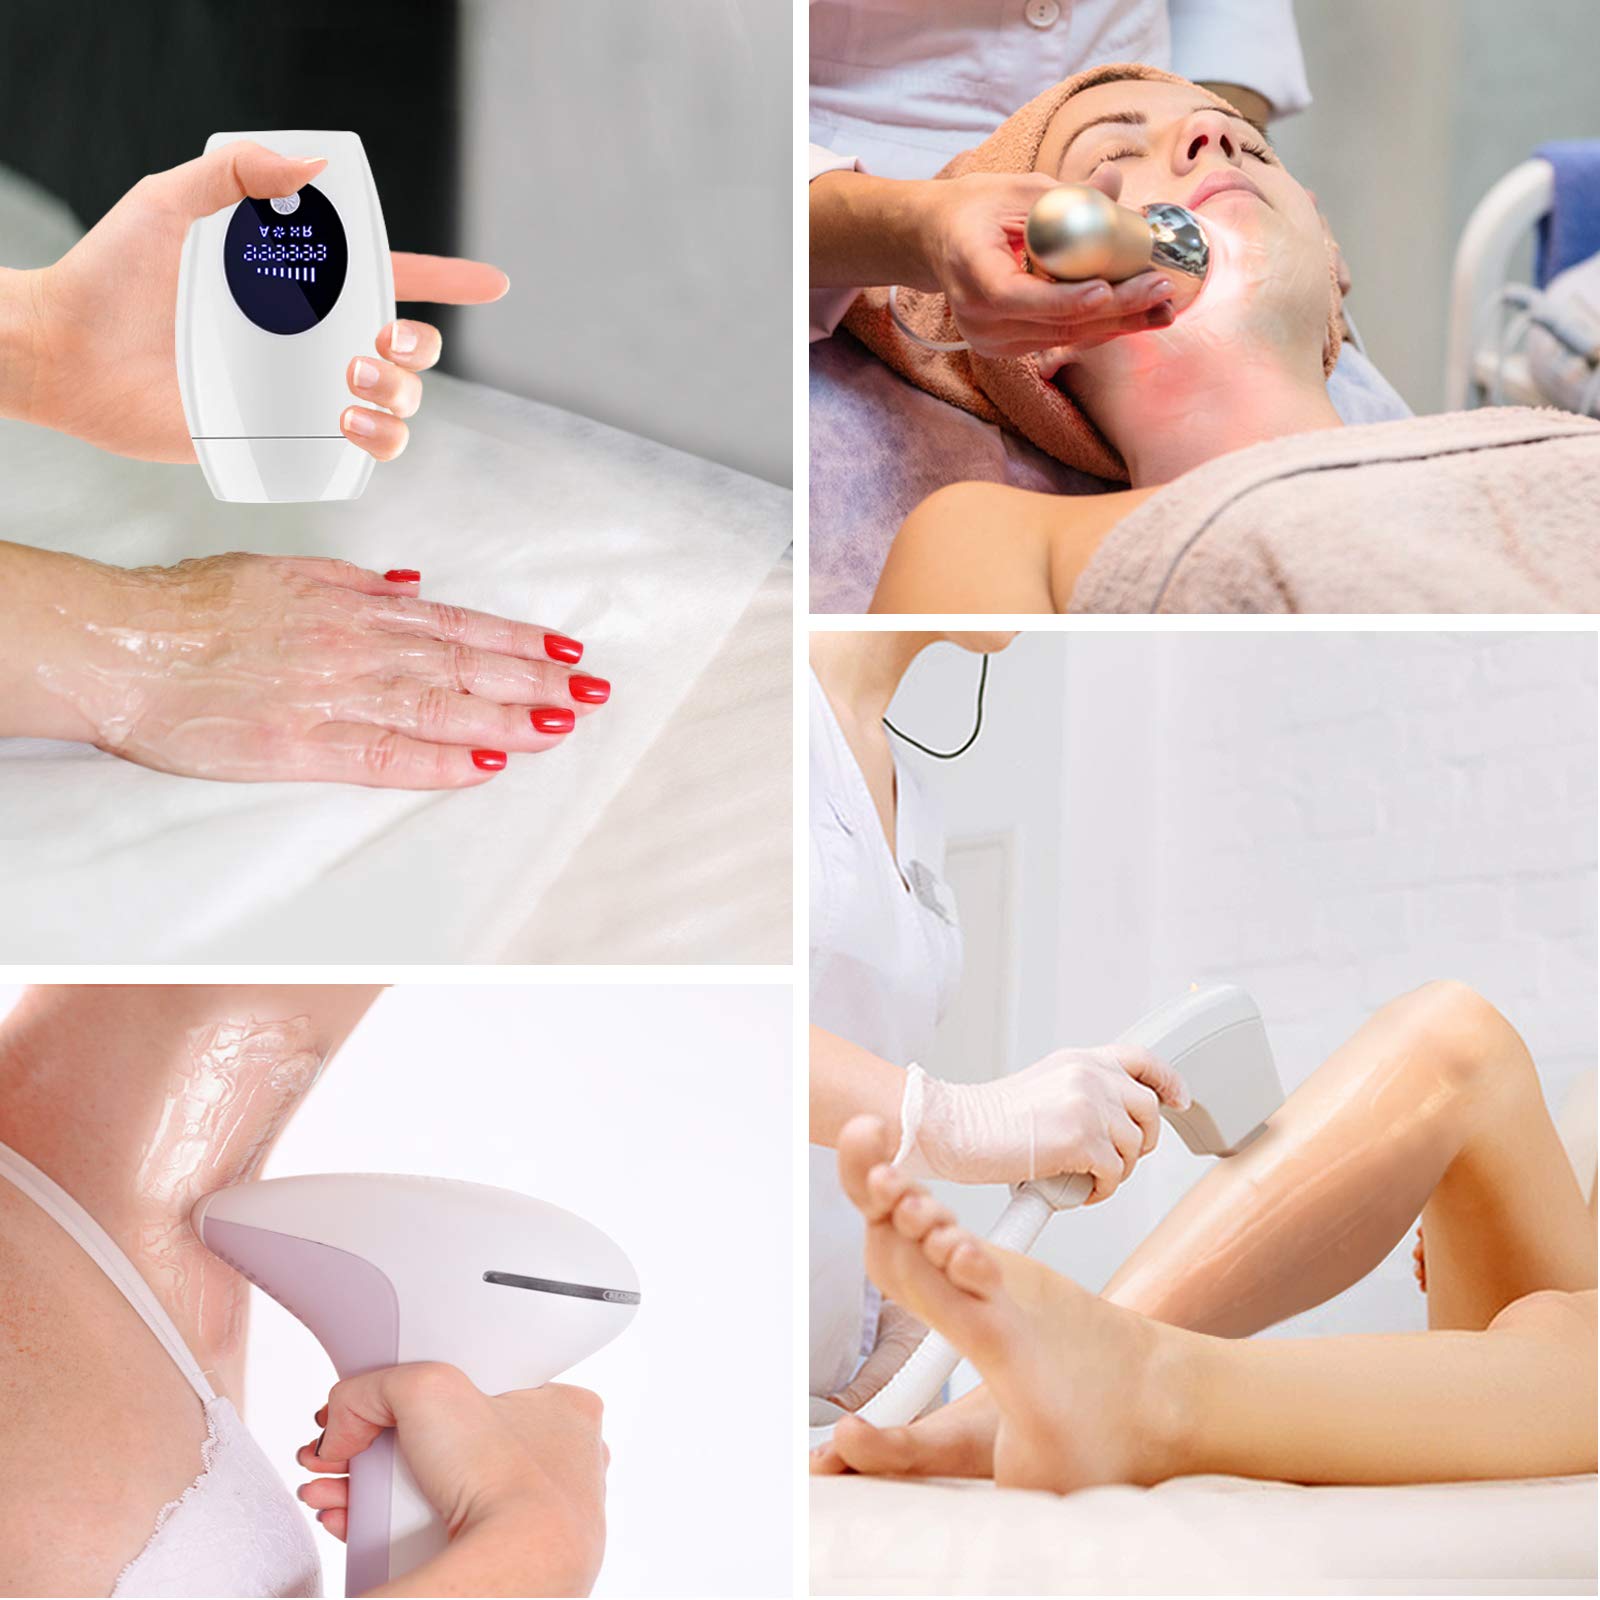 Mua Cooling Gel Use with for Laser Hair Removal Device and RF Radio  Frequency Facial Machine for Women and Man 300ML trên Amazon Mỹ chính hãng  2023 | Fado